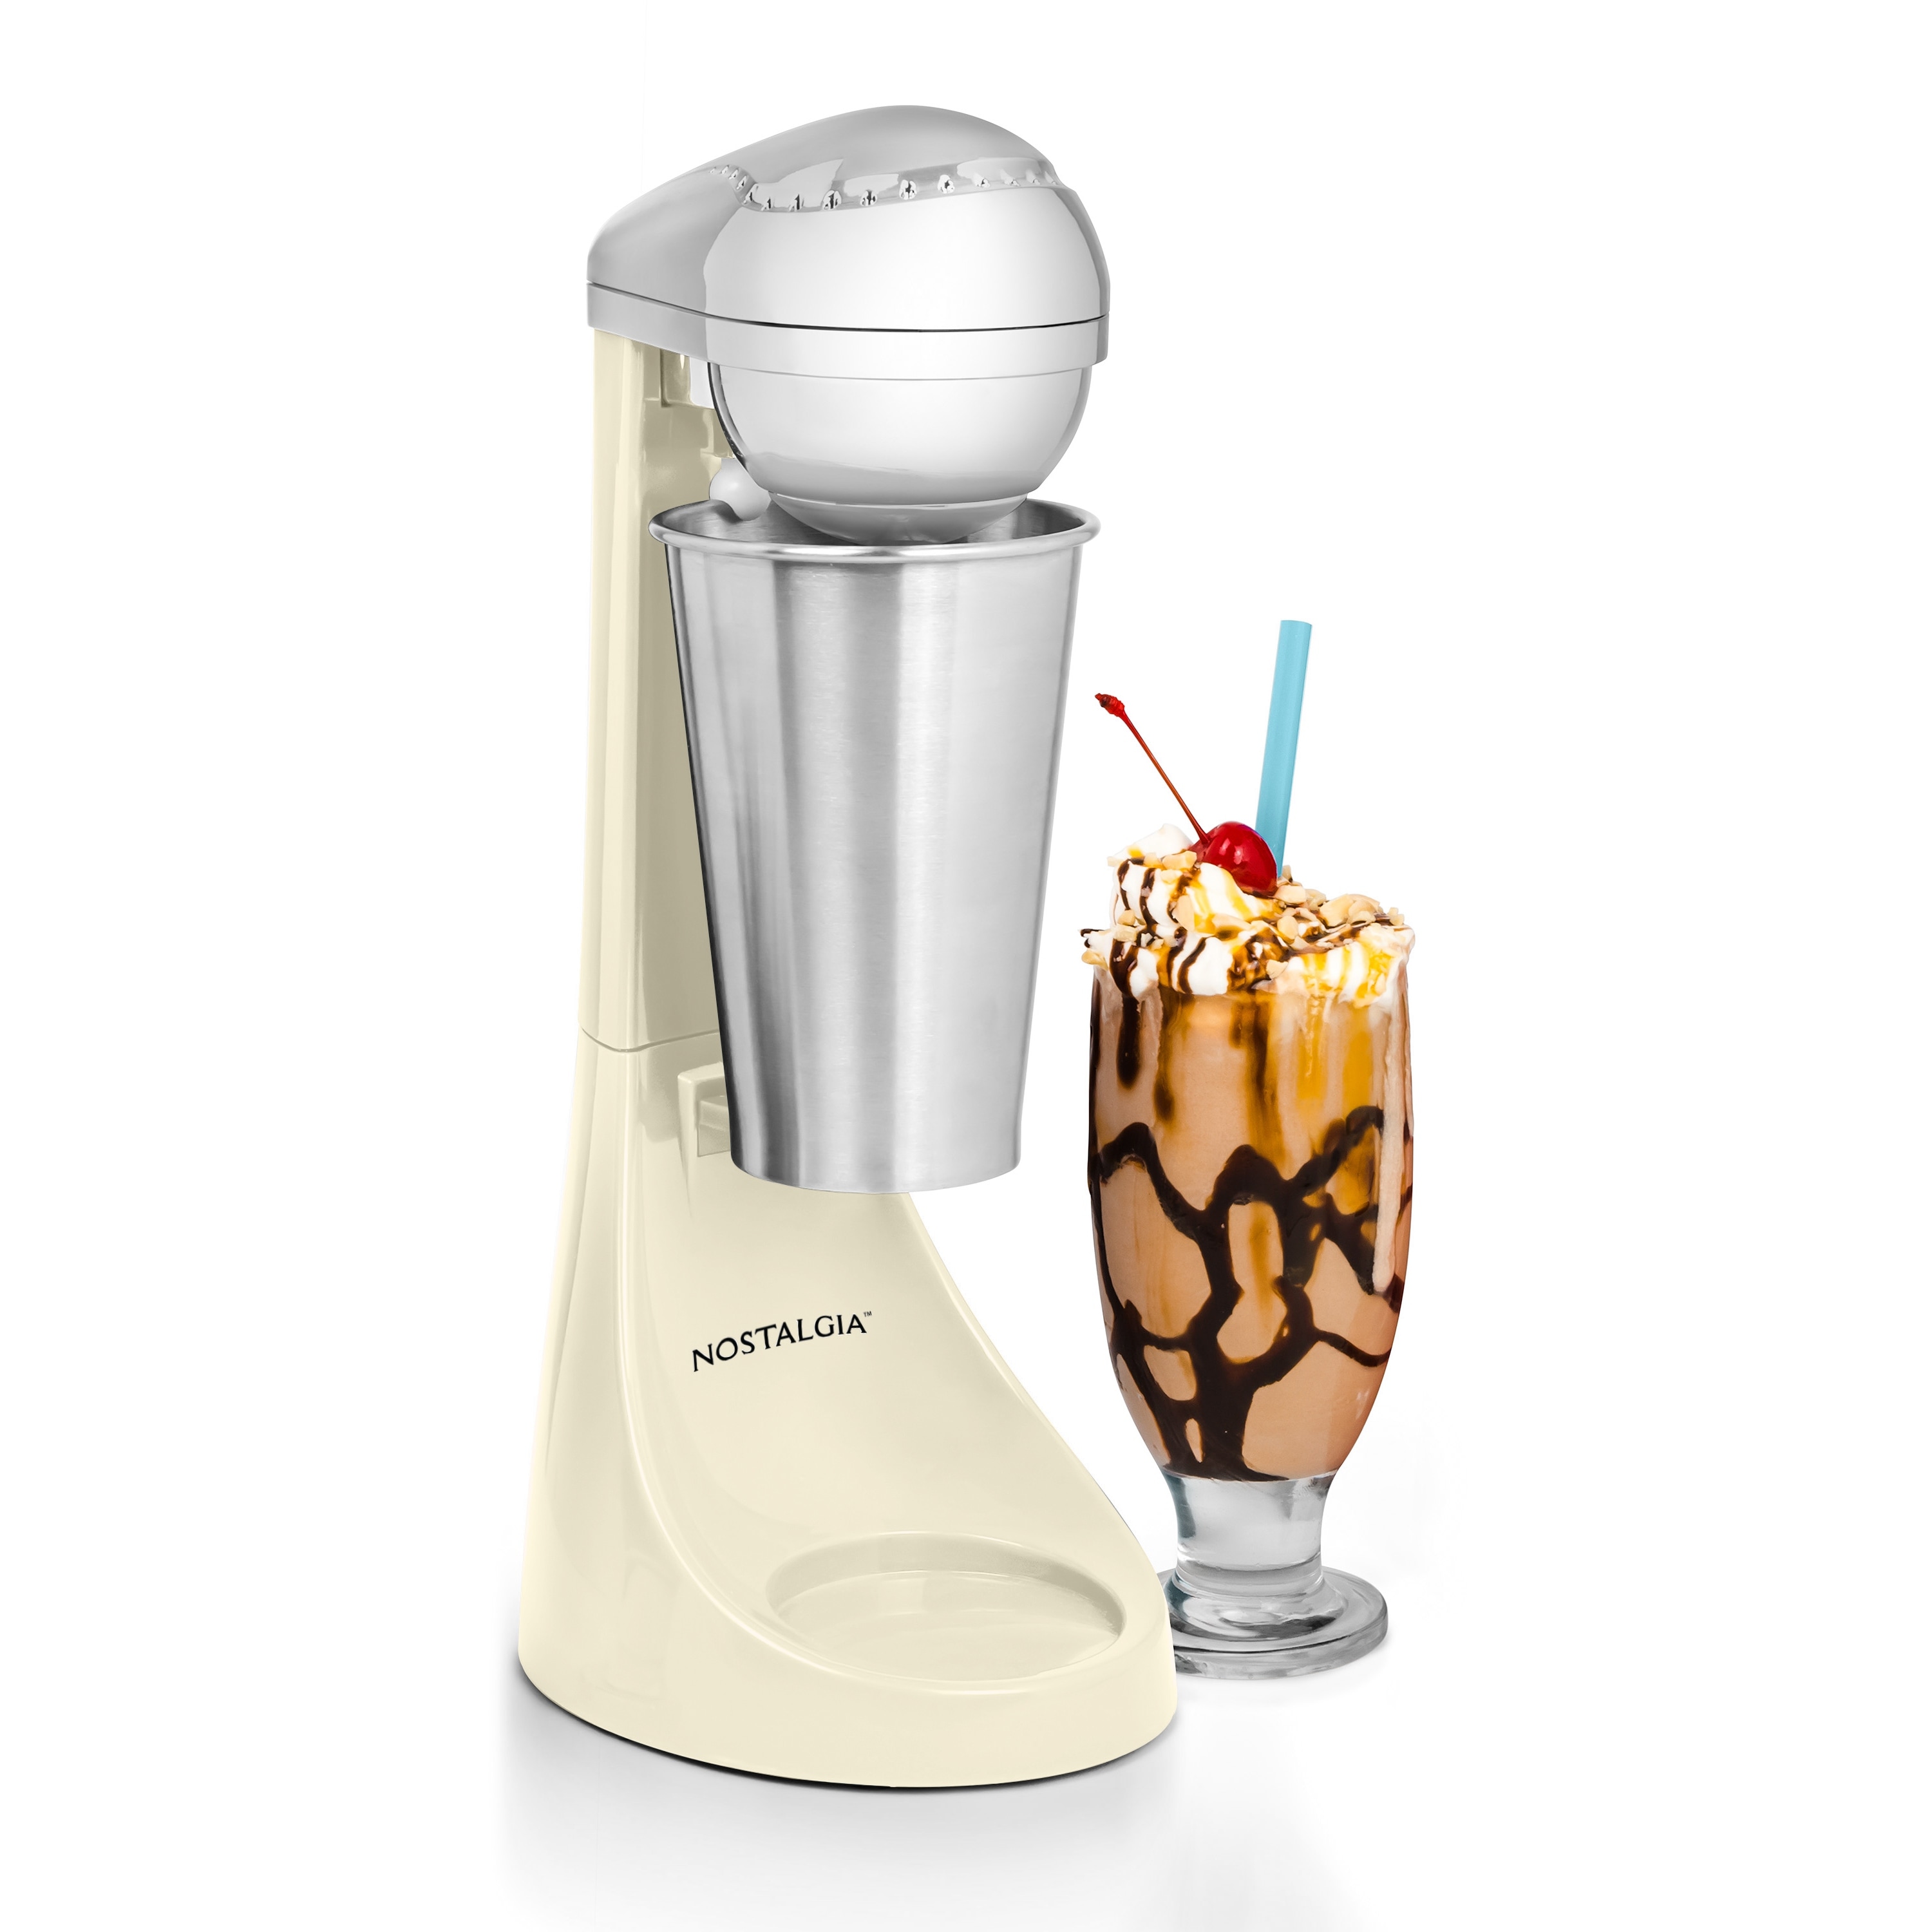 https://ak1.ostkcdn.com/images/products/is/images/direct/8fdc2d245e867960a851dbf0c71f81b2c883da7b/Nostalgia-Two-Speed-Electric-Milkshake-Maker-and-Drink-Mixer.jpg